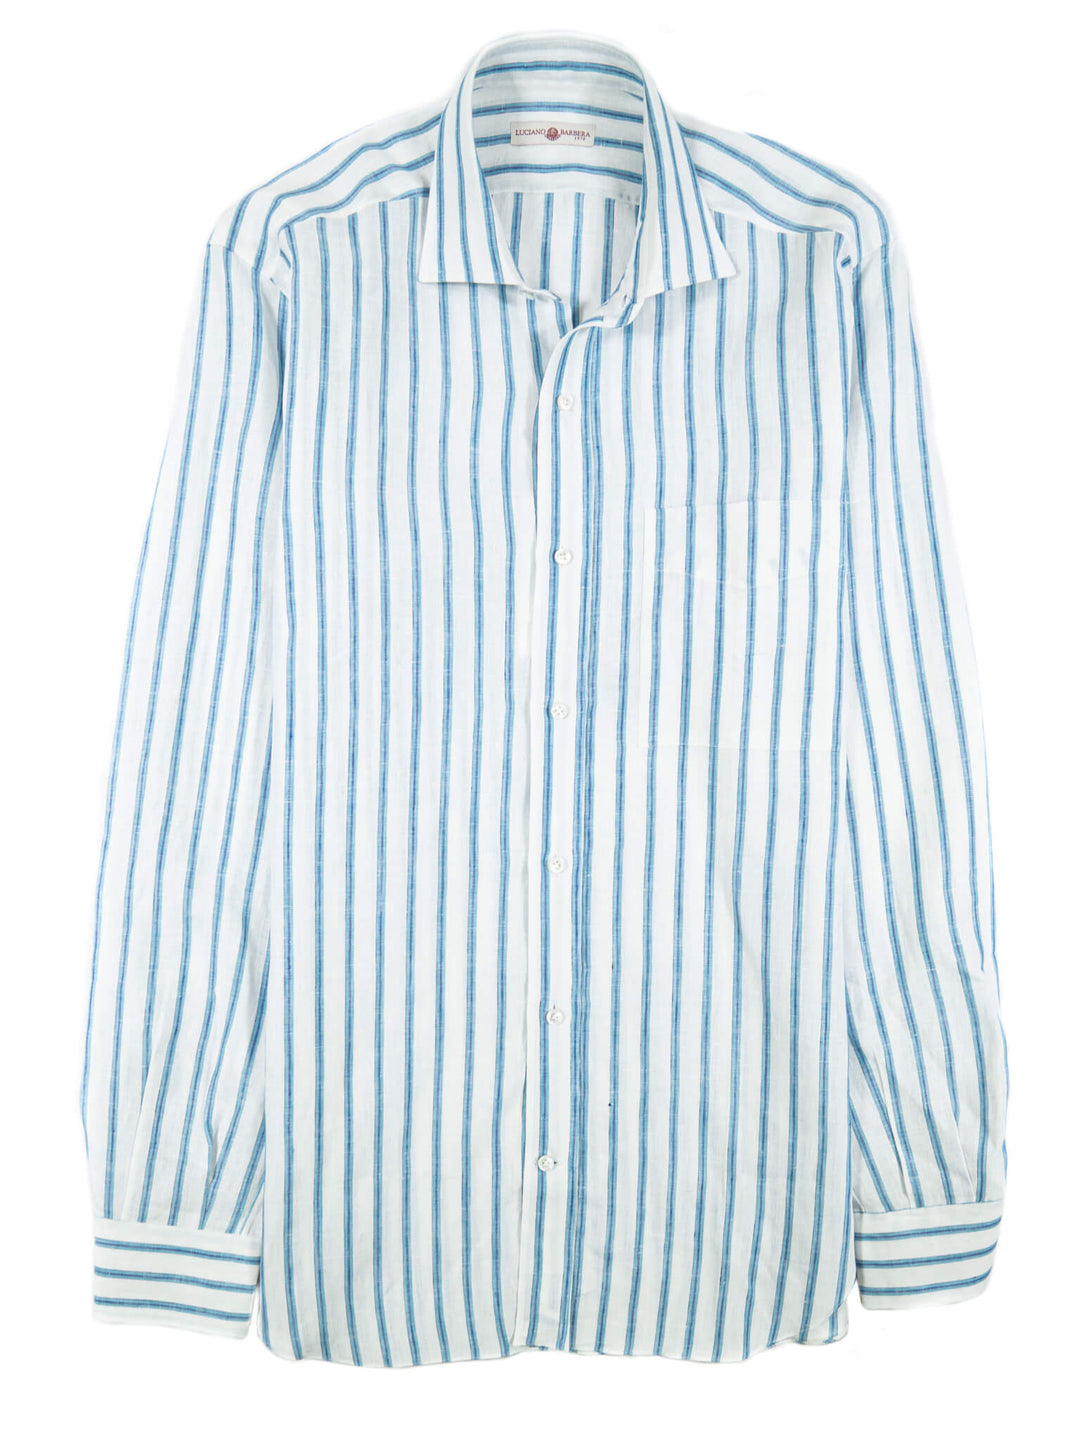 LUCIANO BARBERA TEAL STRIPED LINEN